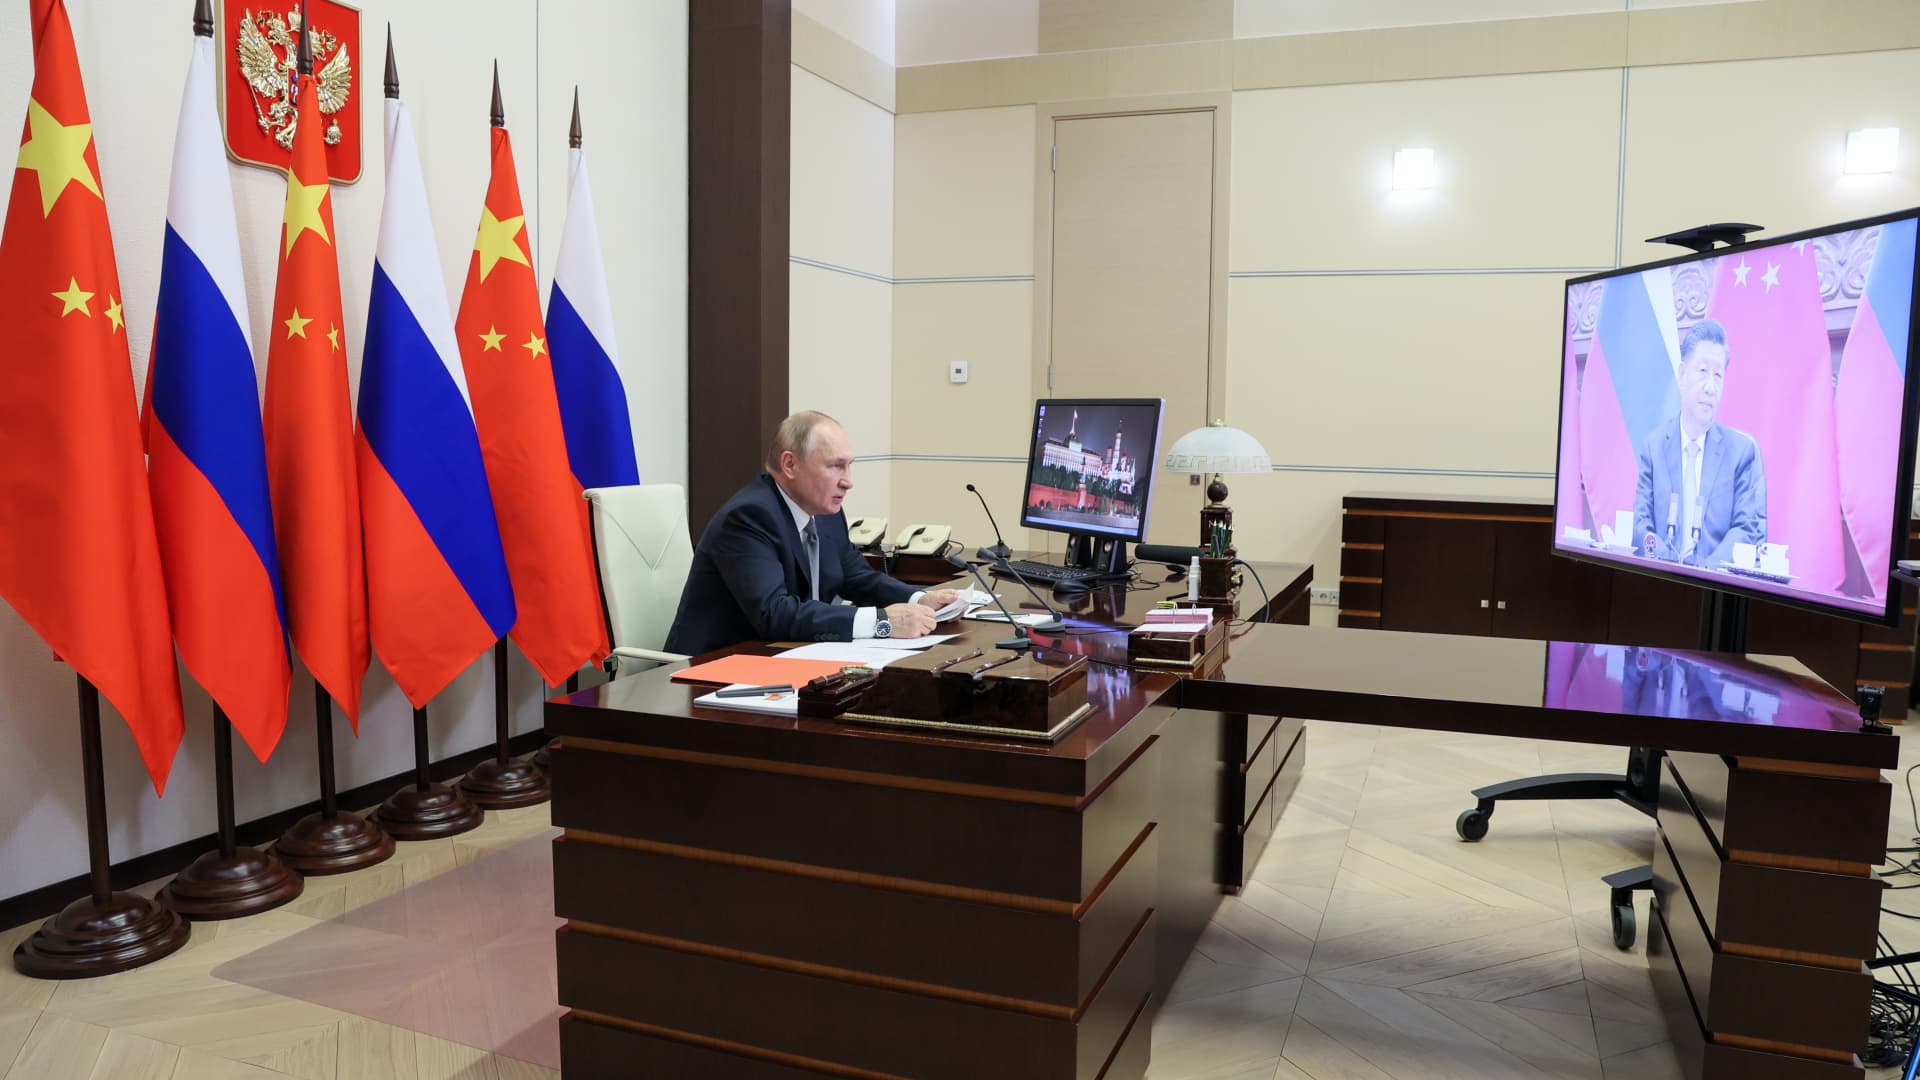 Russia's President Vladimir Putin sits in his office in the Novo-Ogaryovo residence during a bilateral meeting with China's President Xi Jinping (on the video screen) via a video call.